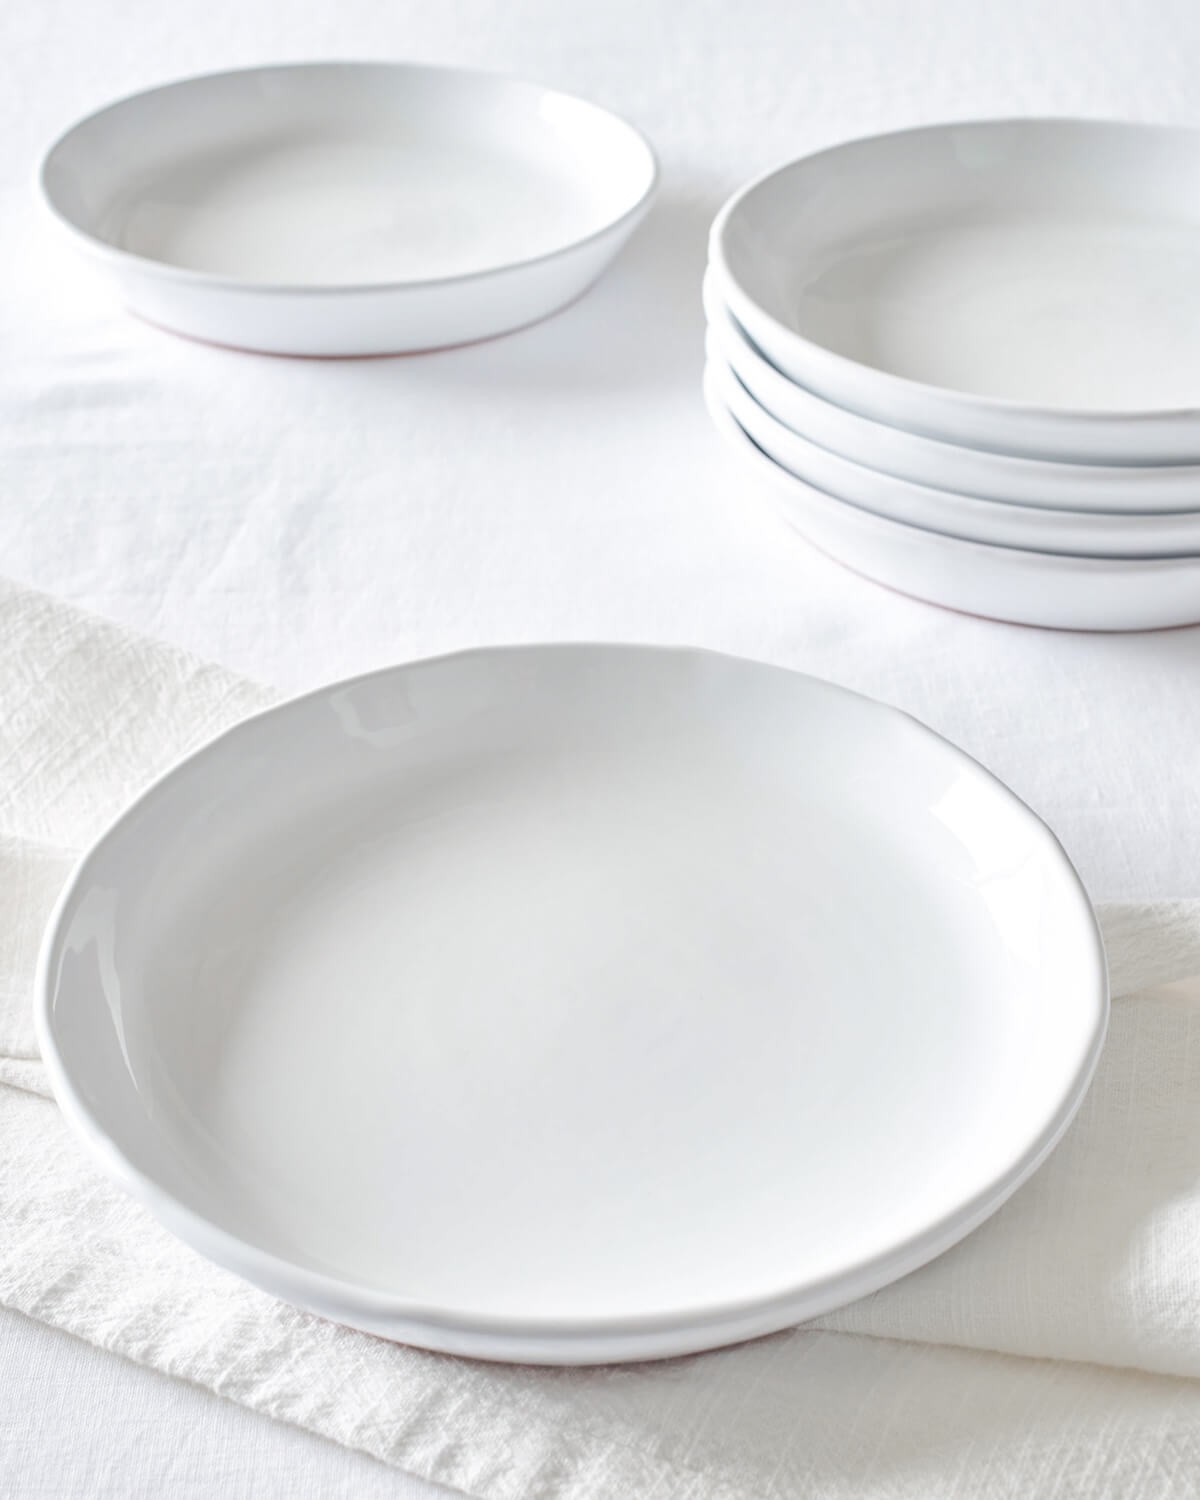 Khira Salad Plates stacked on white table. Part of the Fairkind Morocco Ceramic Collection.